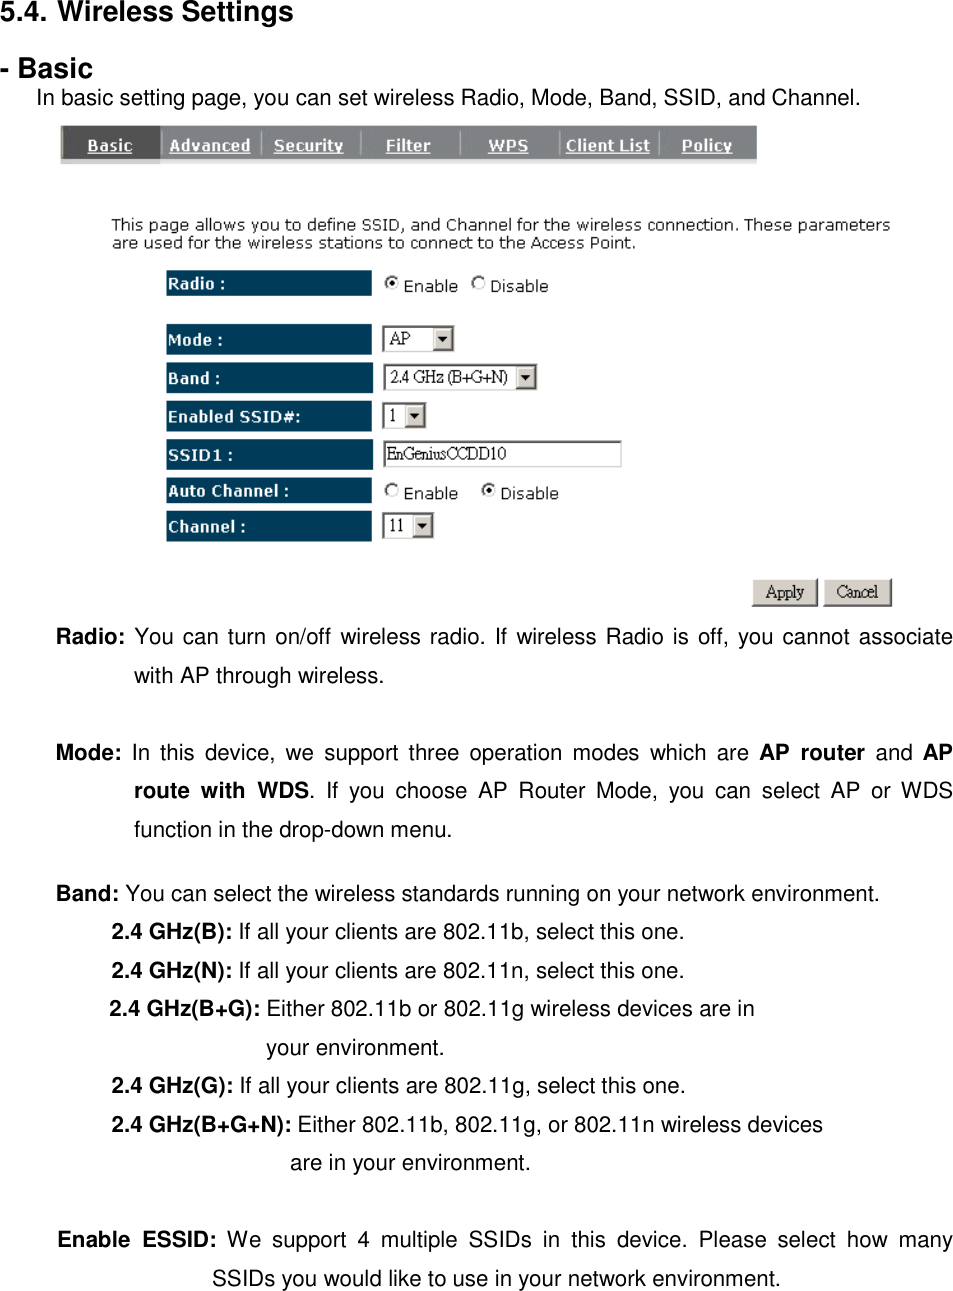 5.4. Wireless Settings - Basic In basic setting page, you can set wireless Radio, Mode, Band, SSID, and Channel.  Radio: You can turn on/off wireless radio. If wireless Radio is off, you cannot associate with AP through wireless.  Mode:  In  this  device,  we  support  three  operation  modes  which  are  AP  router  and  AP route  with  WDS.  If  you  choose  AP  Router  Mode,  you  can  select  AP  or  WDS function in the drop-down menu.  Band: You can select the wireless standards running on your network environment.   2.4 GHz(B): If all your clients are 802.11b, select this one.   2.4 GHz(N): If all your clients are 802.11n, select this one.  2.4 GHz(B+G): Either 802.11b or 802.11g wireless devices are in   your environment.  2.4 GHz(G): If all your clients are 802.11g, select this one.  2.4 GHz(B+G+N): Either 802.11b, 802.11g, or 802.11n wireless devices  are in your environment.  Enable  ESSID:  We  support  4  multiple  SSIDs  in  this  device.  Please  select  how  many SSIDs you would like to use in your network environment. 